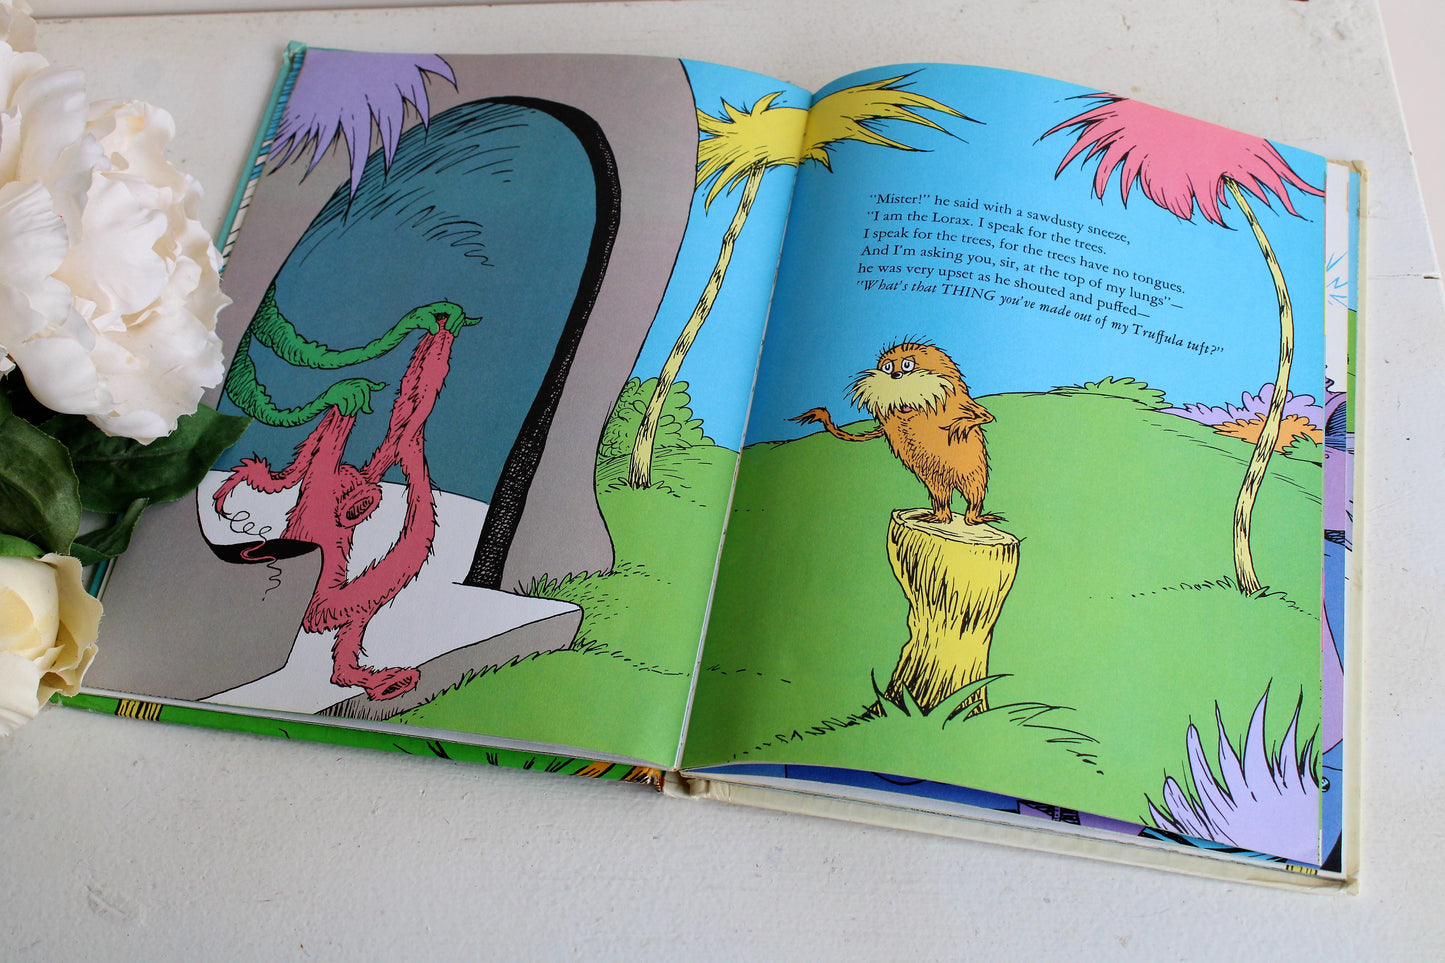 Vintage 1970s Book, The Lorax by Dr. Seuss